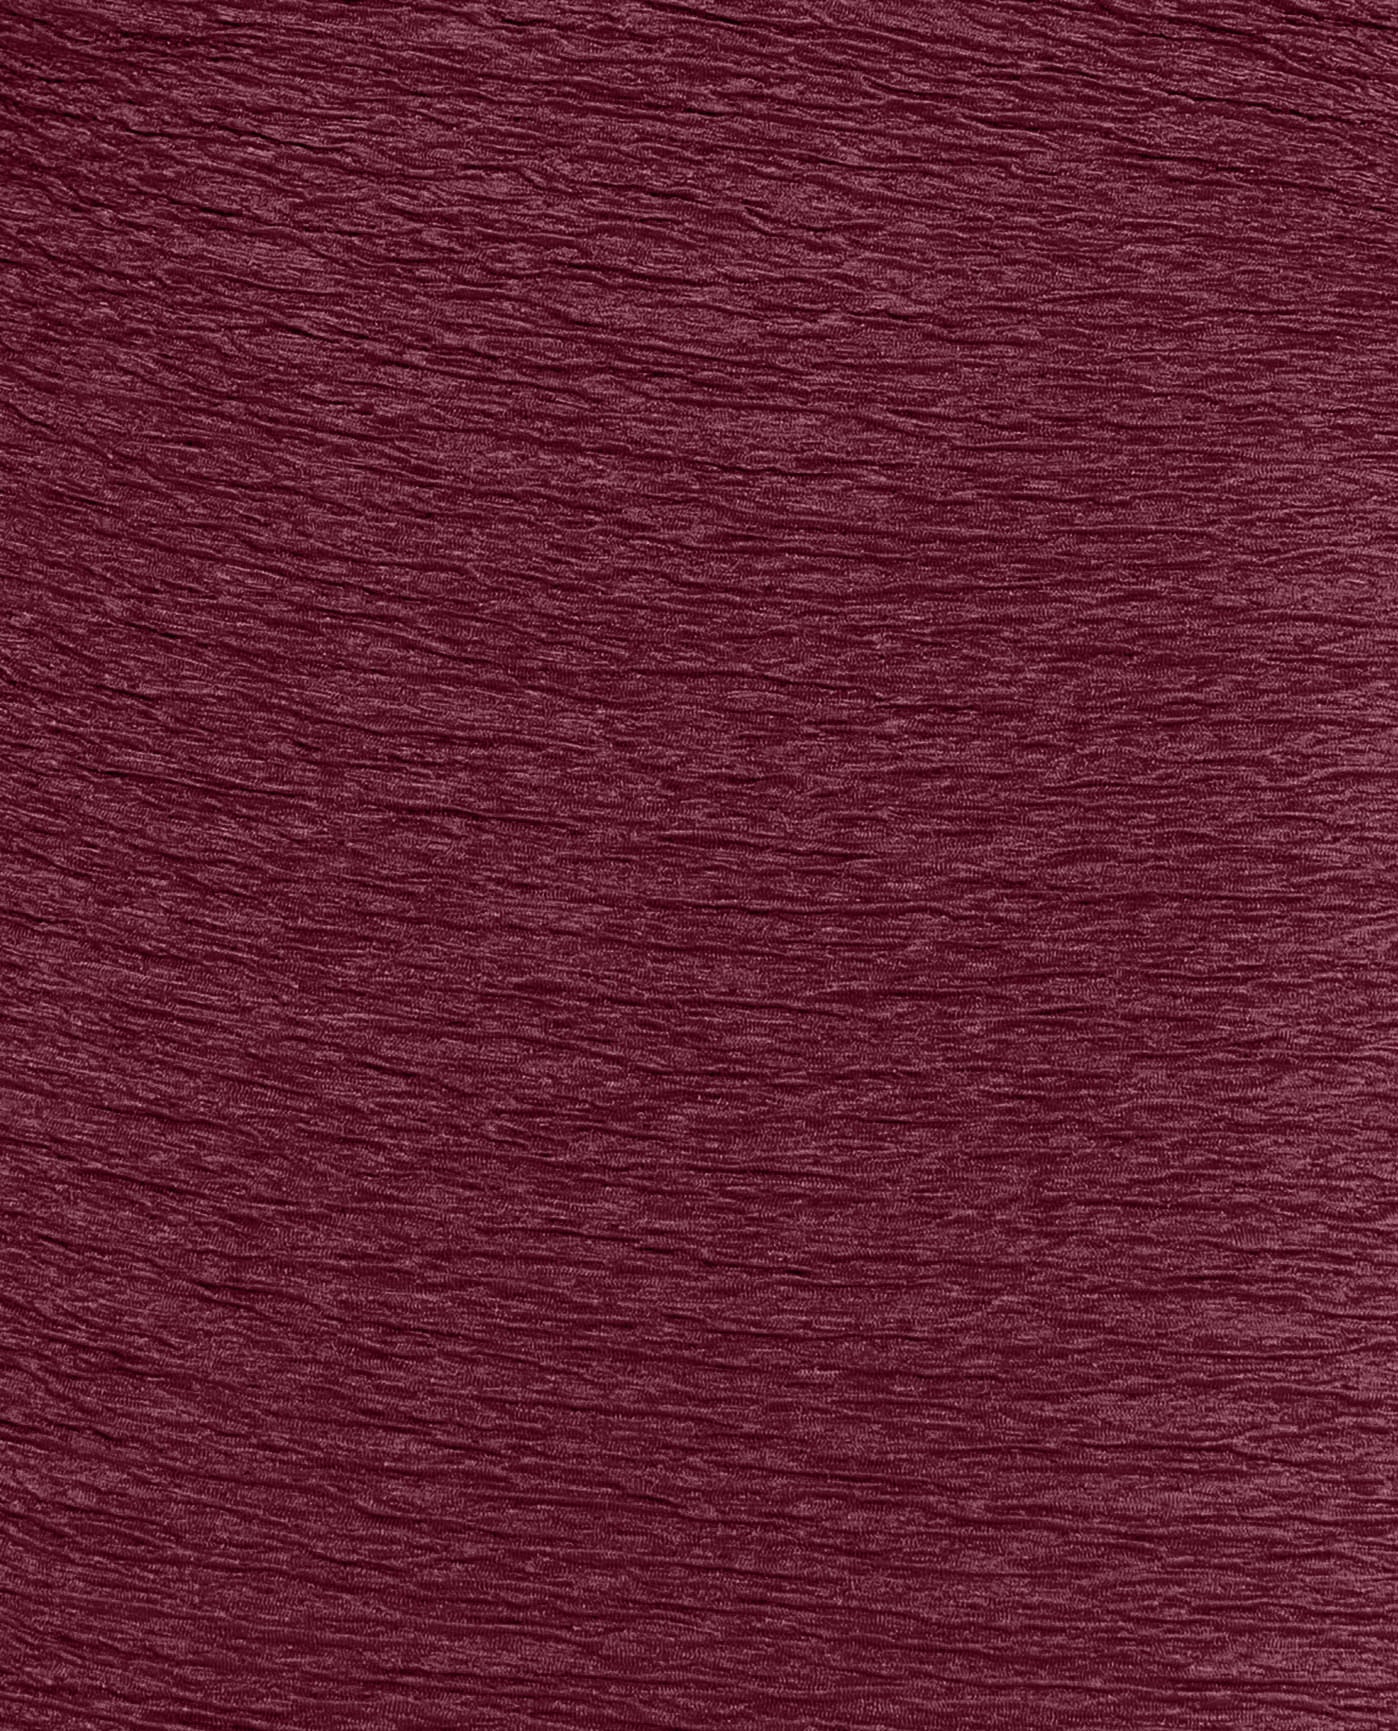 FABRIC SWATCH VIEW OF CHLORINE RESISTANT KRINKLE TEXTURED SOLID HIGH NECK ONE PIECE | KRINKLE WINE